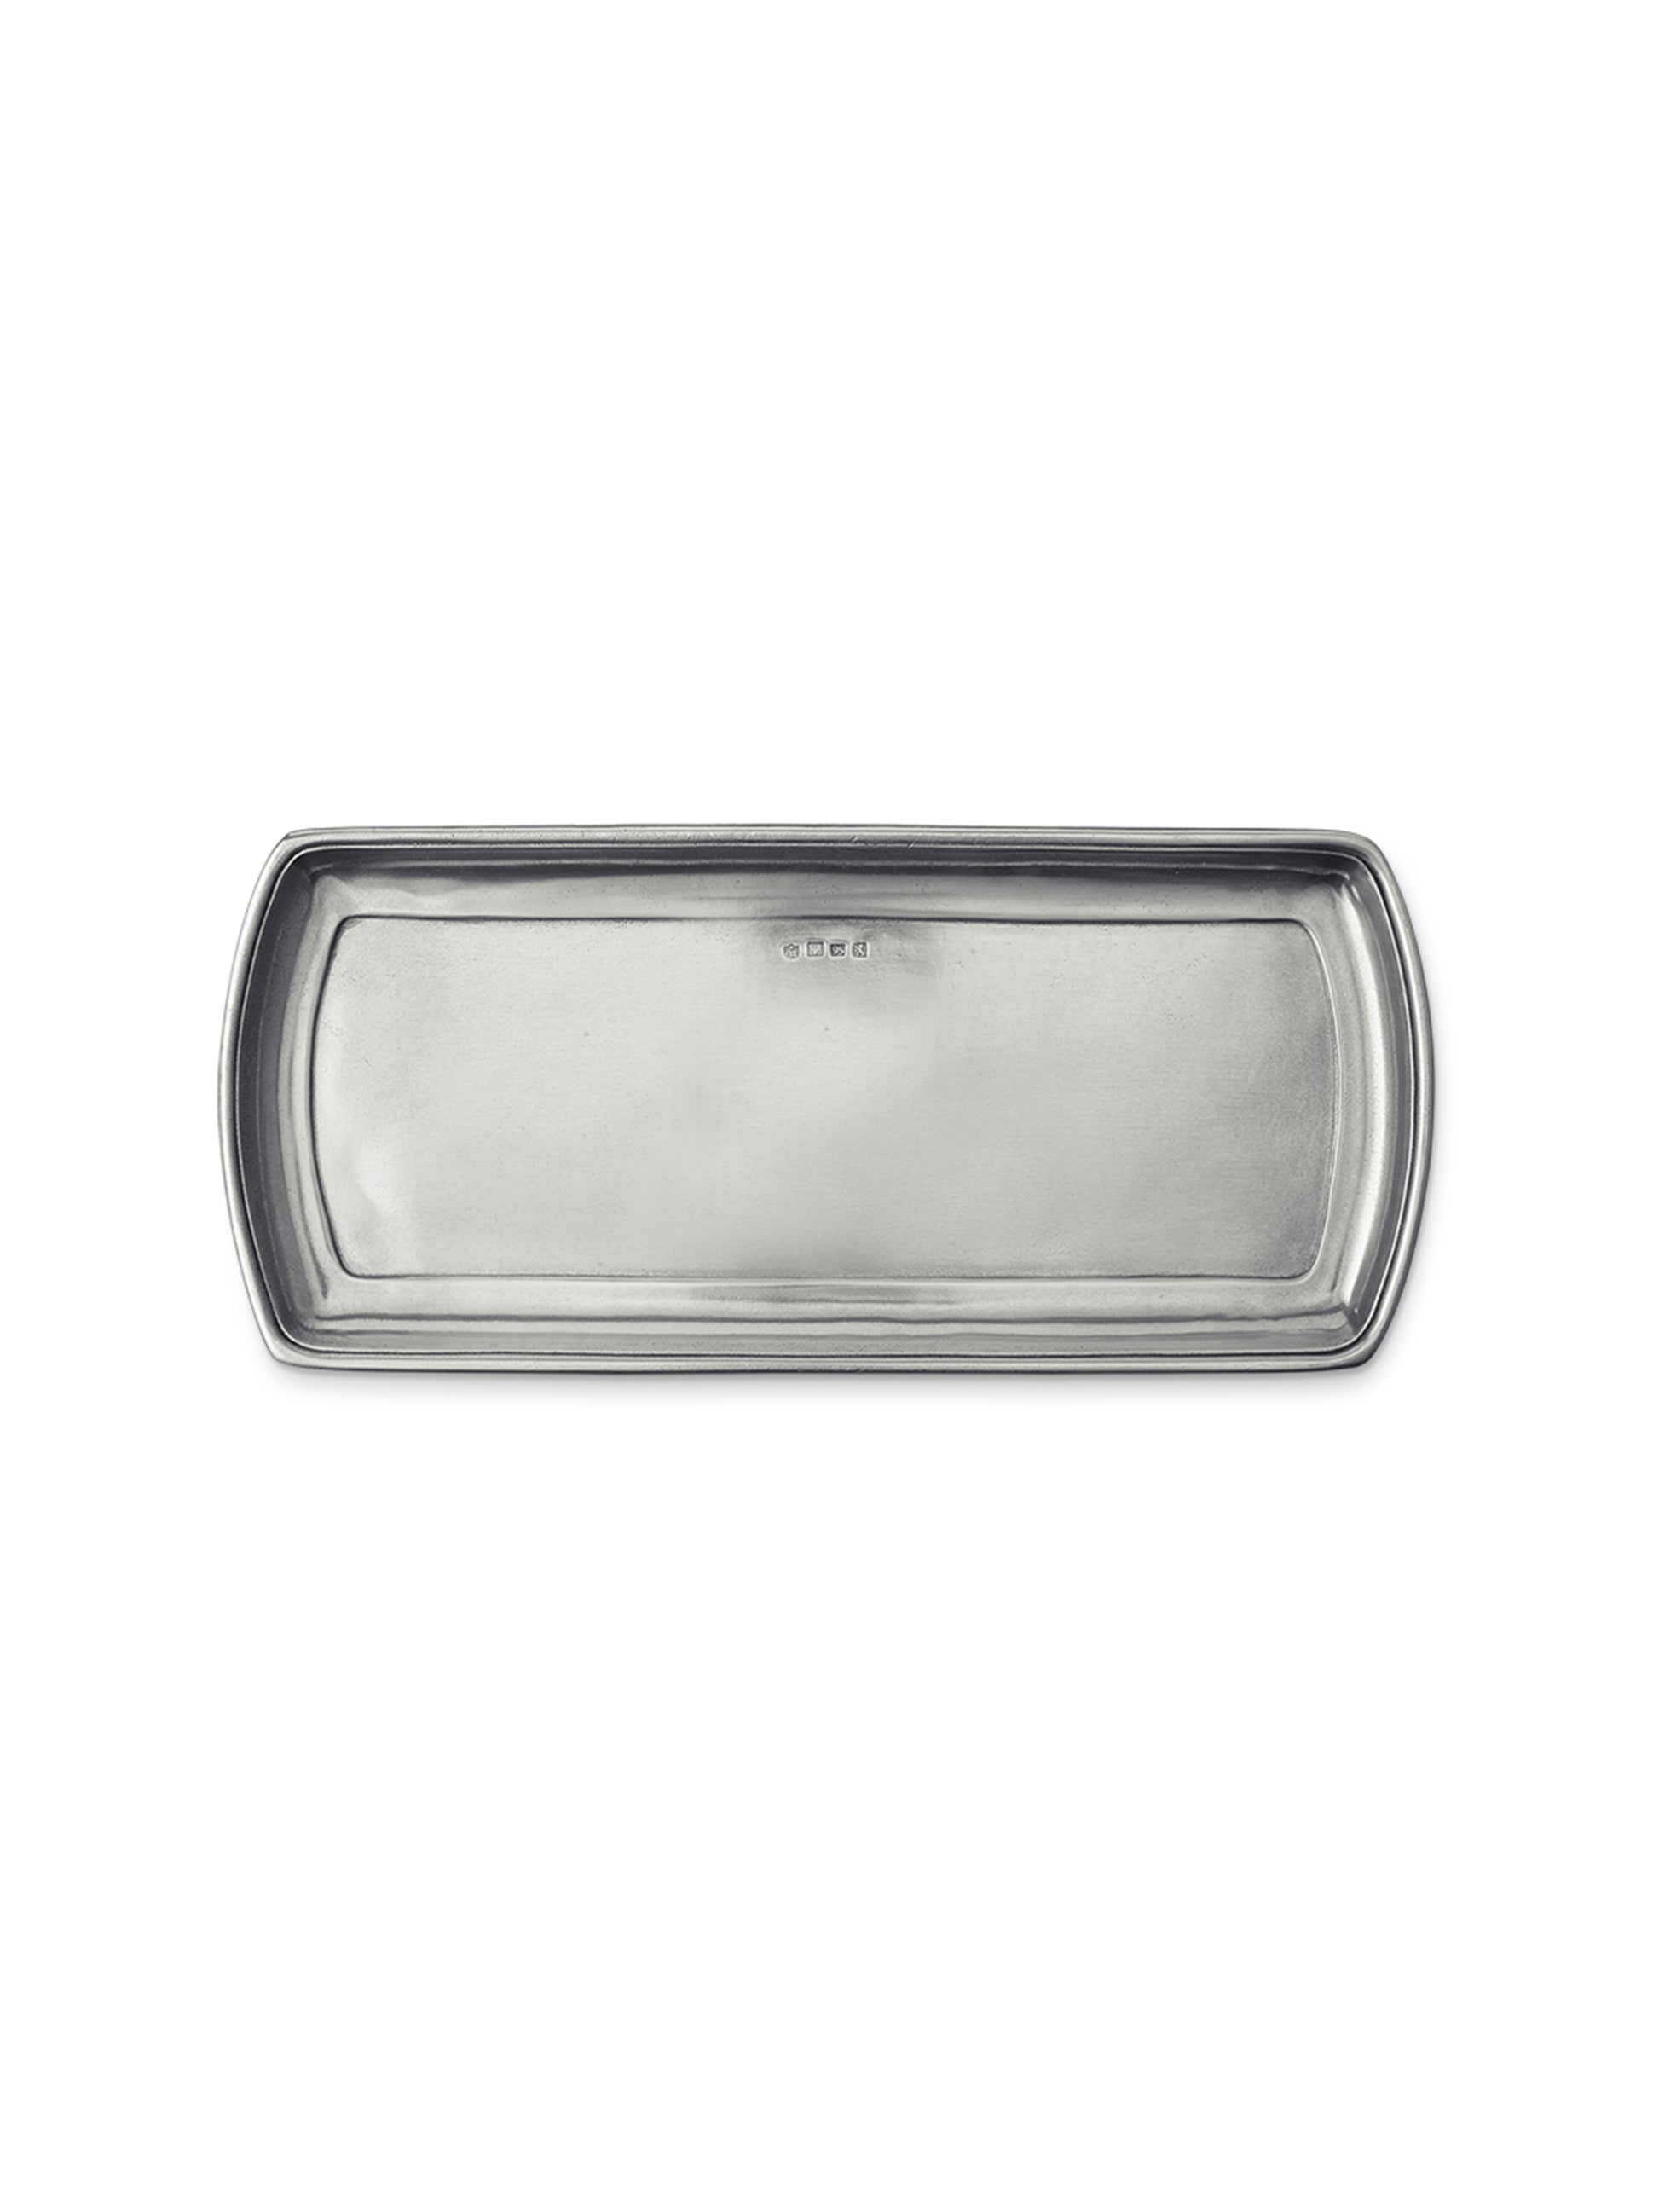 MATCH Pewter Narrow Tray Classico Weston Table